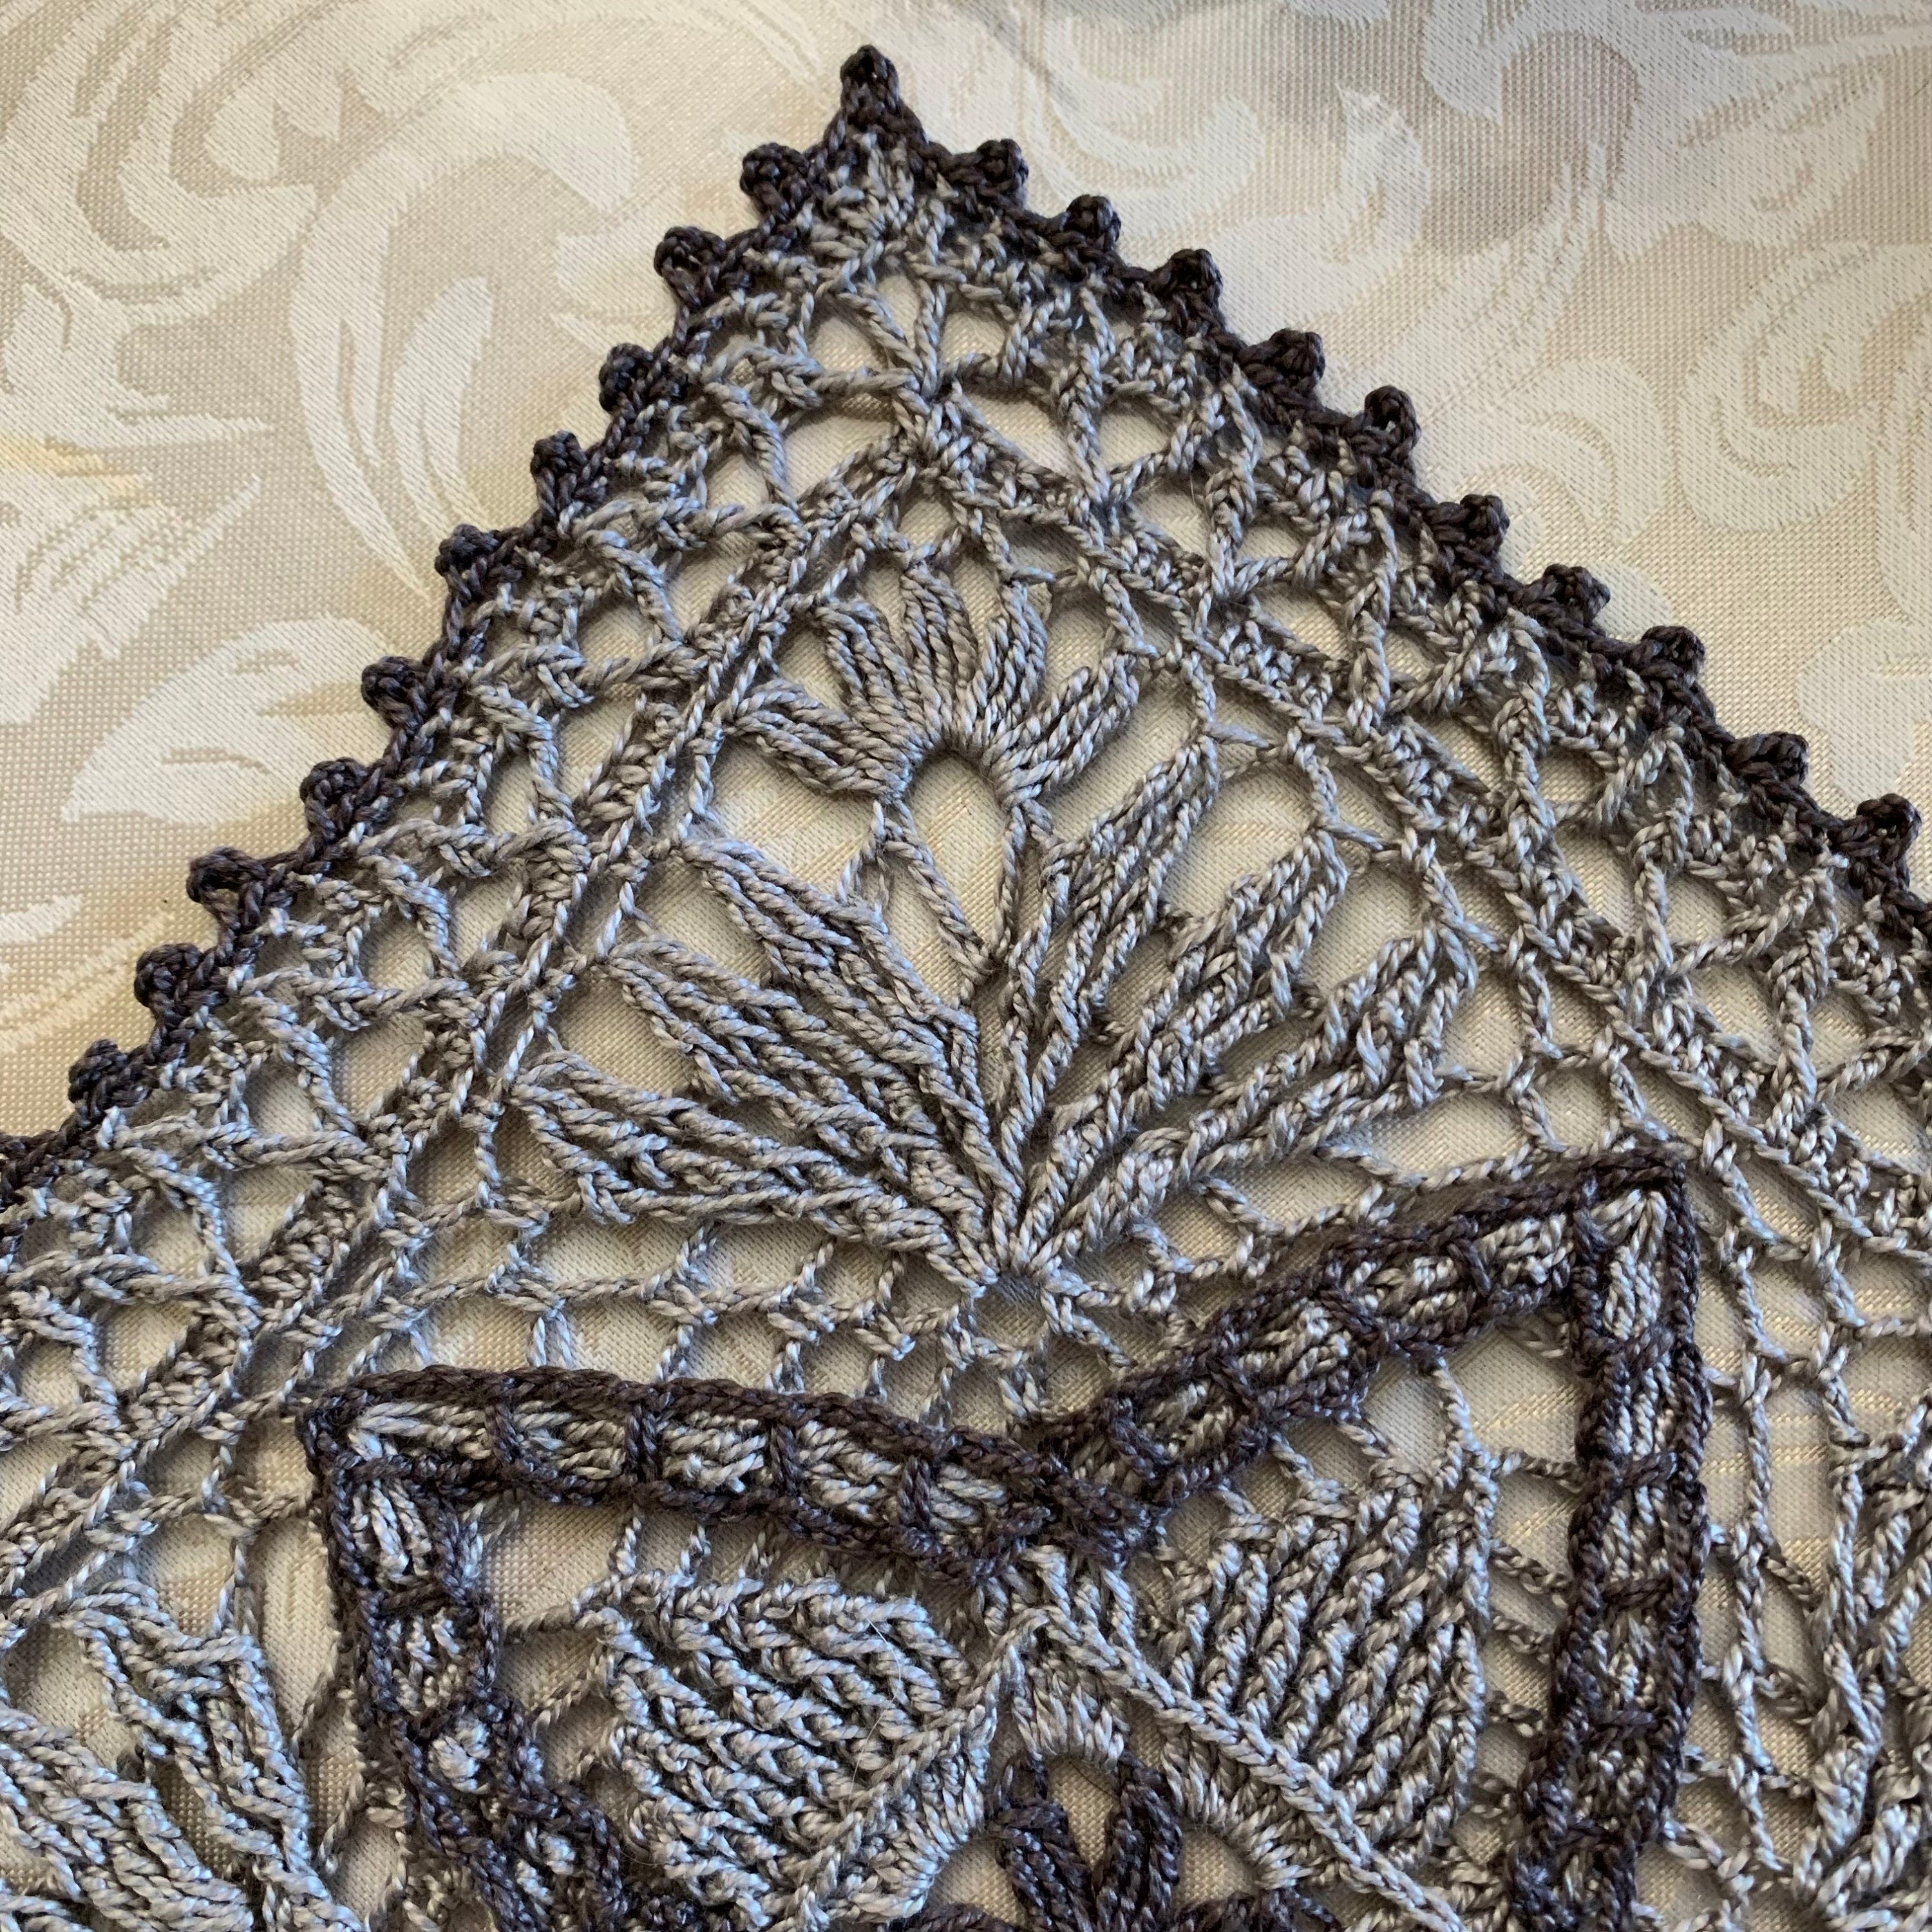 8” Square Crochet Doily-Light Gray with Charcoal Gray Accents